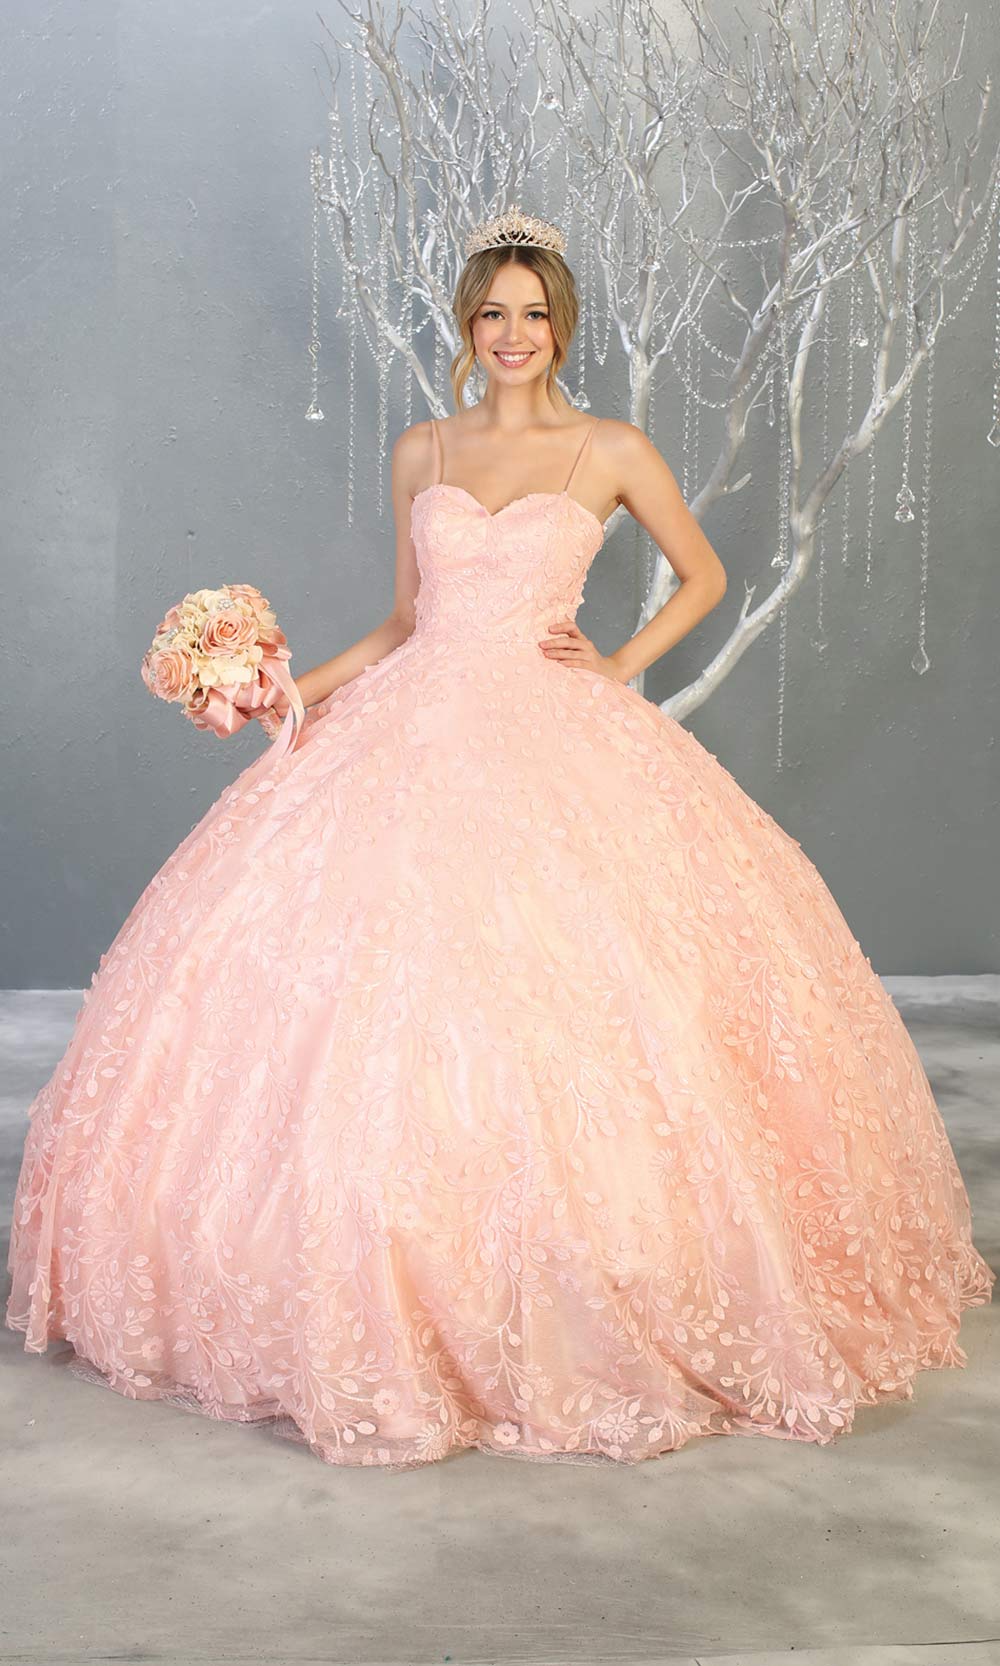 MayqueenLK150 blush pink quinceanera ball gown w/lace detail and thin straps. This light pink ball gown is perfect for engagement dress, wedding reception, indowestern party gown, sweet 16, debut, sweet 15, sweet 18. Plus sizes available for ballgowns.jpg